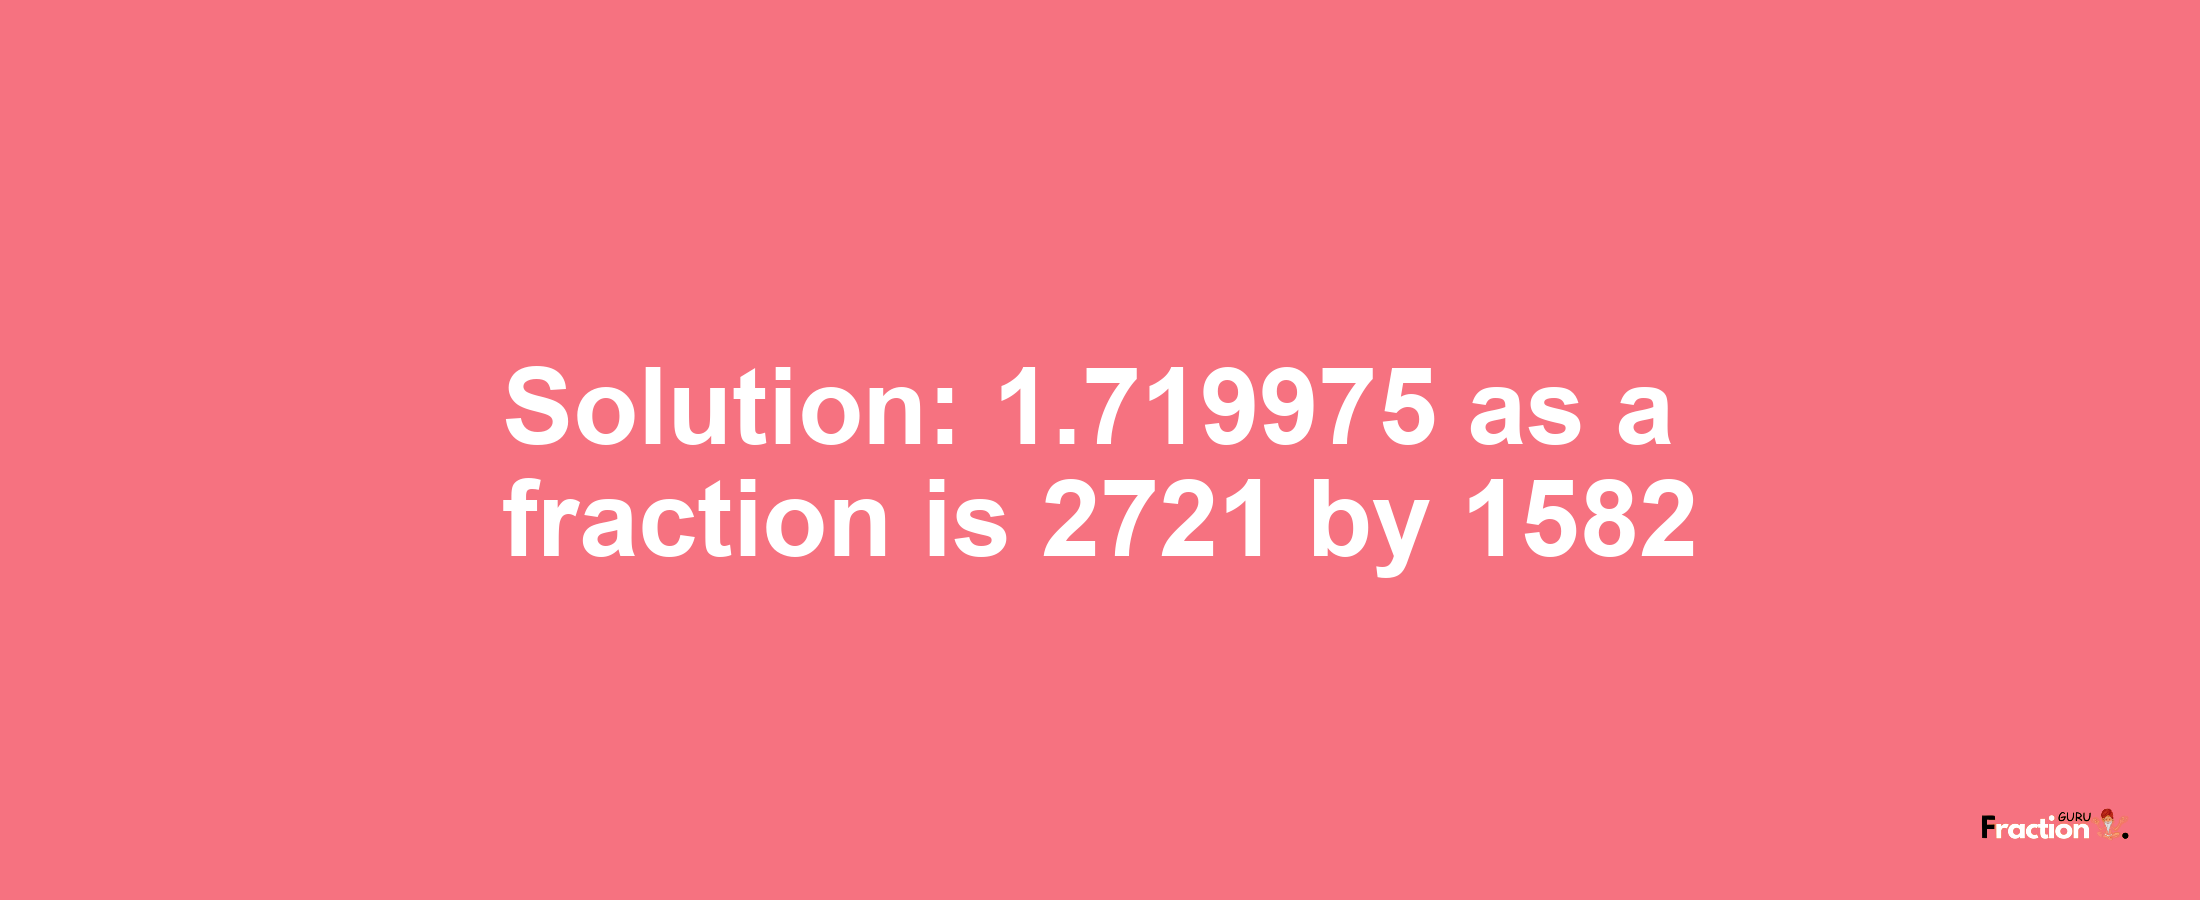 Solution:1.719975 as a fraction is 2721/1582